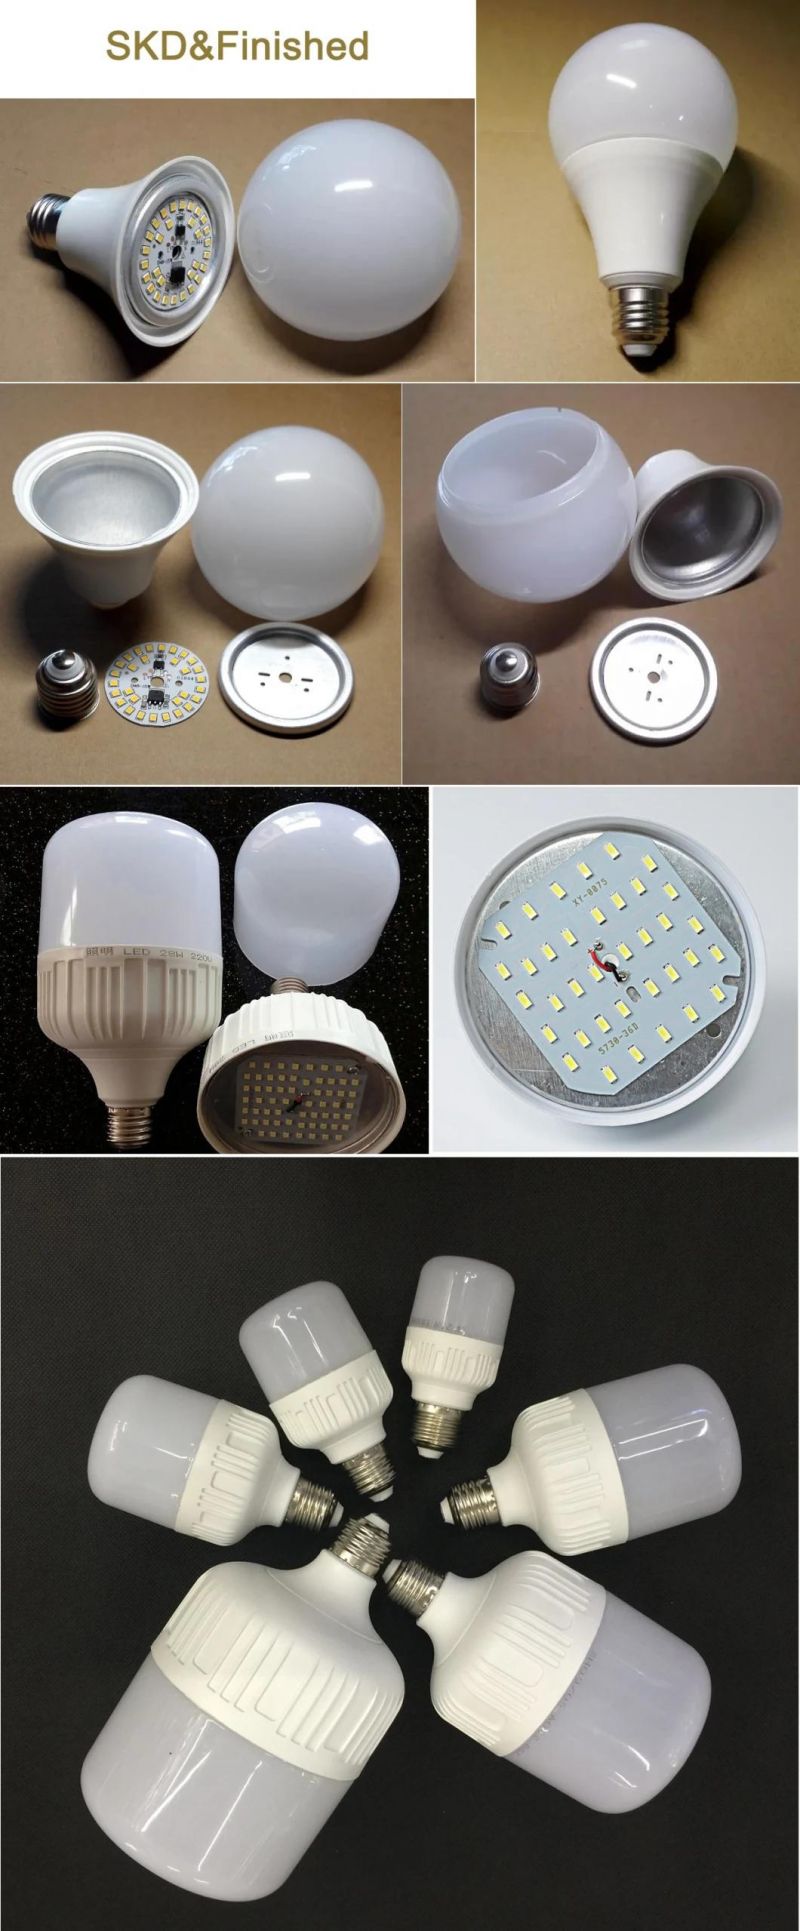 China Supplier Home Cheap B22 7W 18W 12W 9W LED Bulb Raw Material Parts